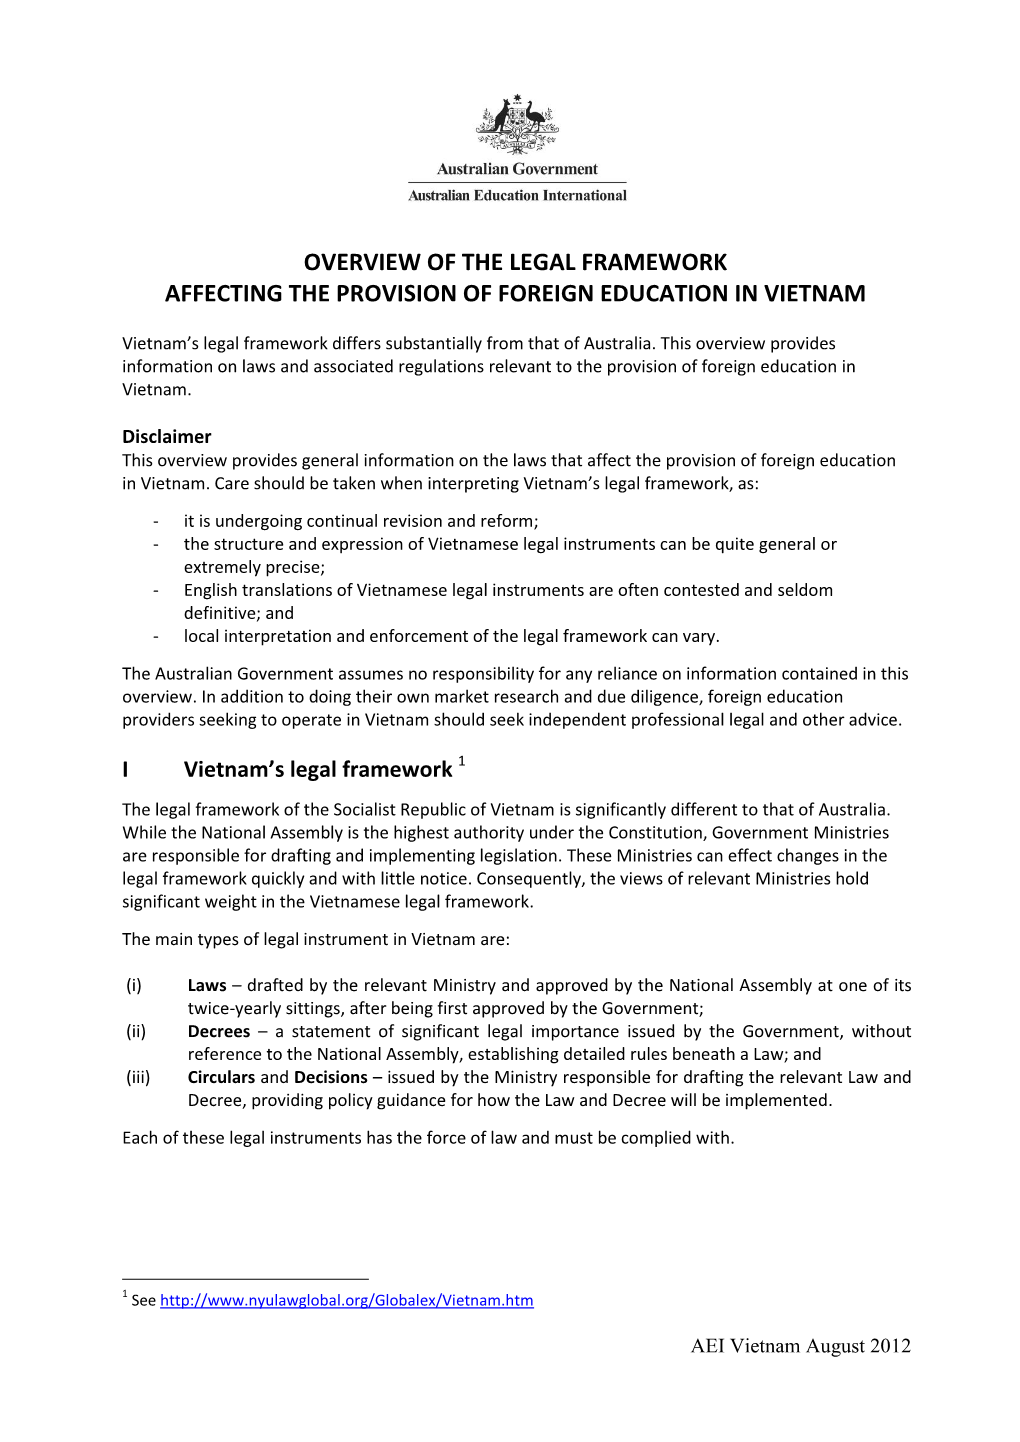 Overview of the Legal Framework Affecting the Provision of Foreign Education in Vietnam